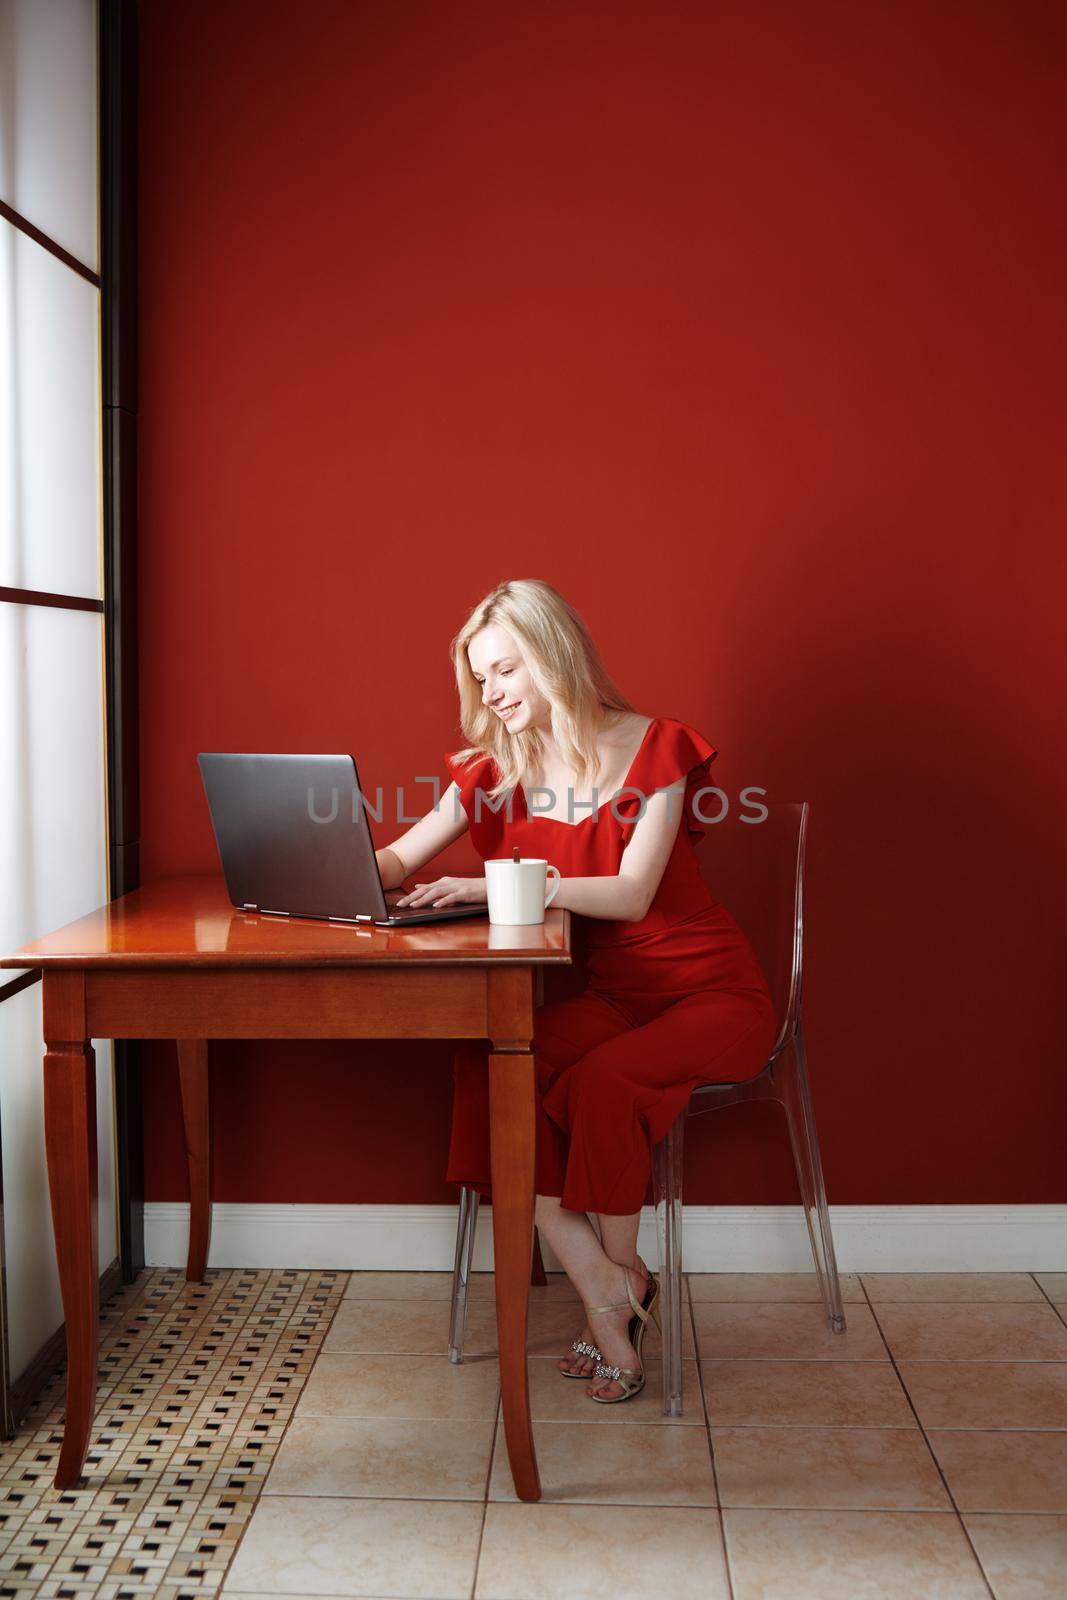 Young adult woman sitting at the table and working on laptop